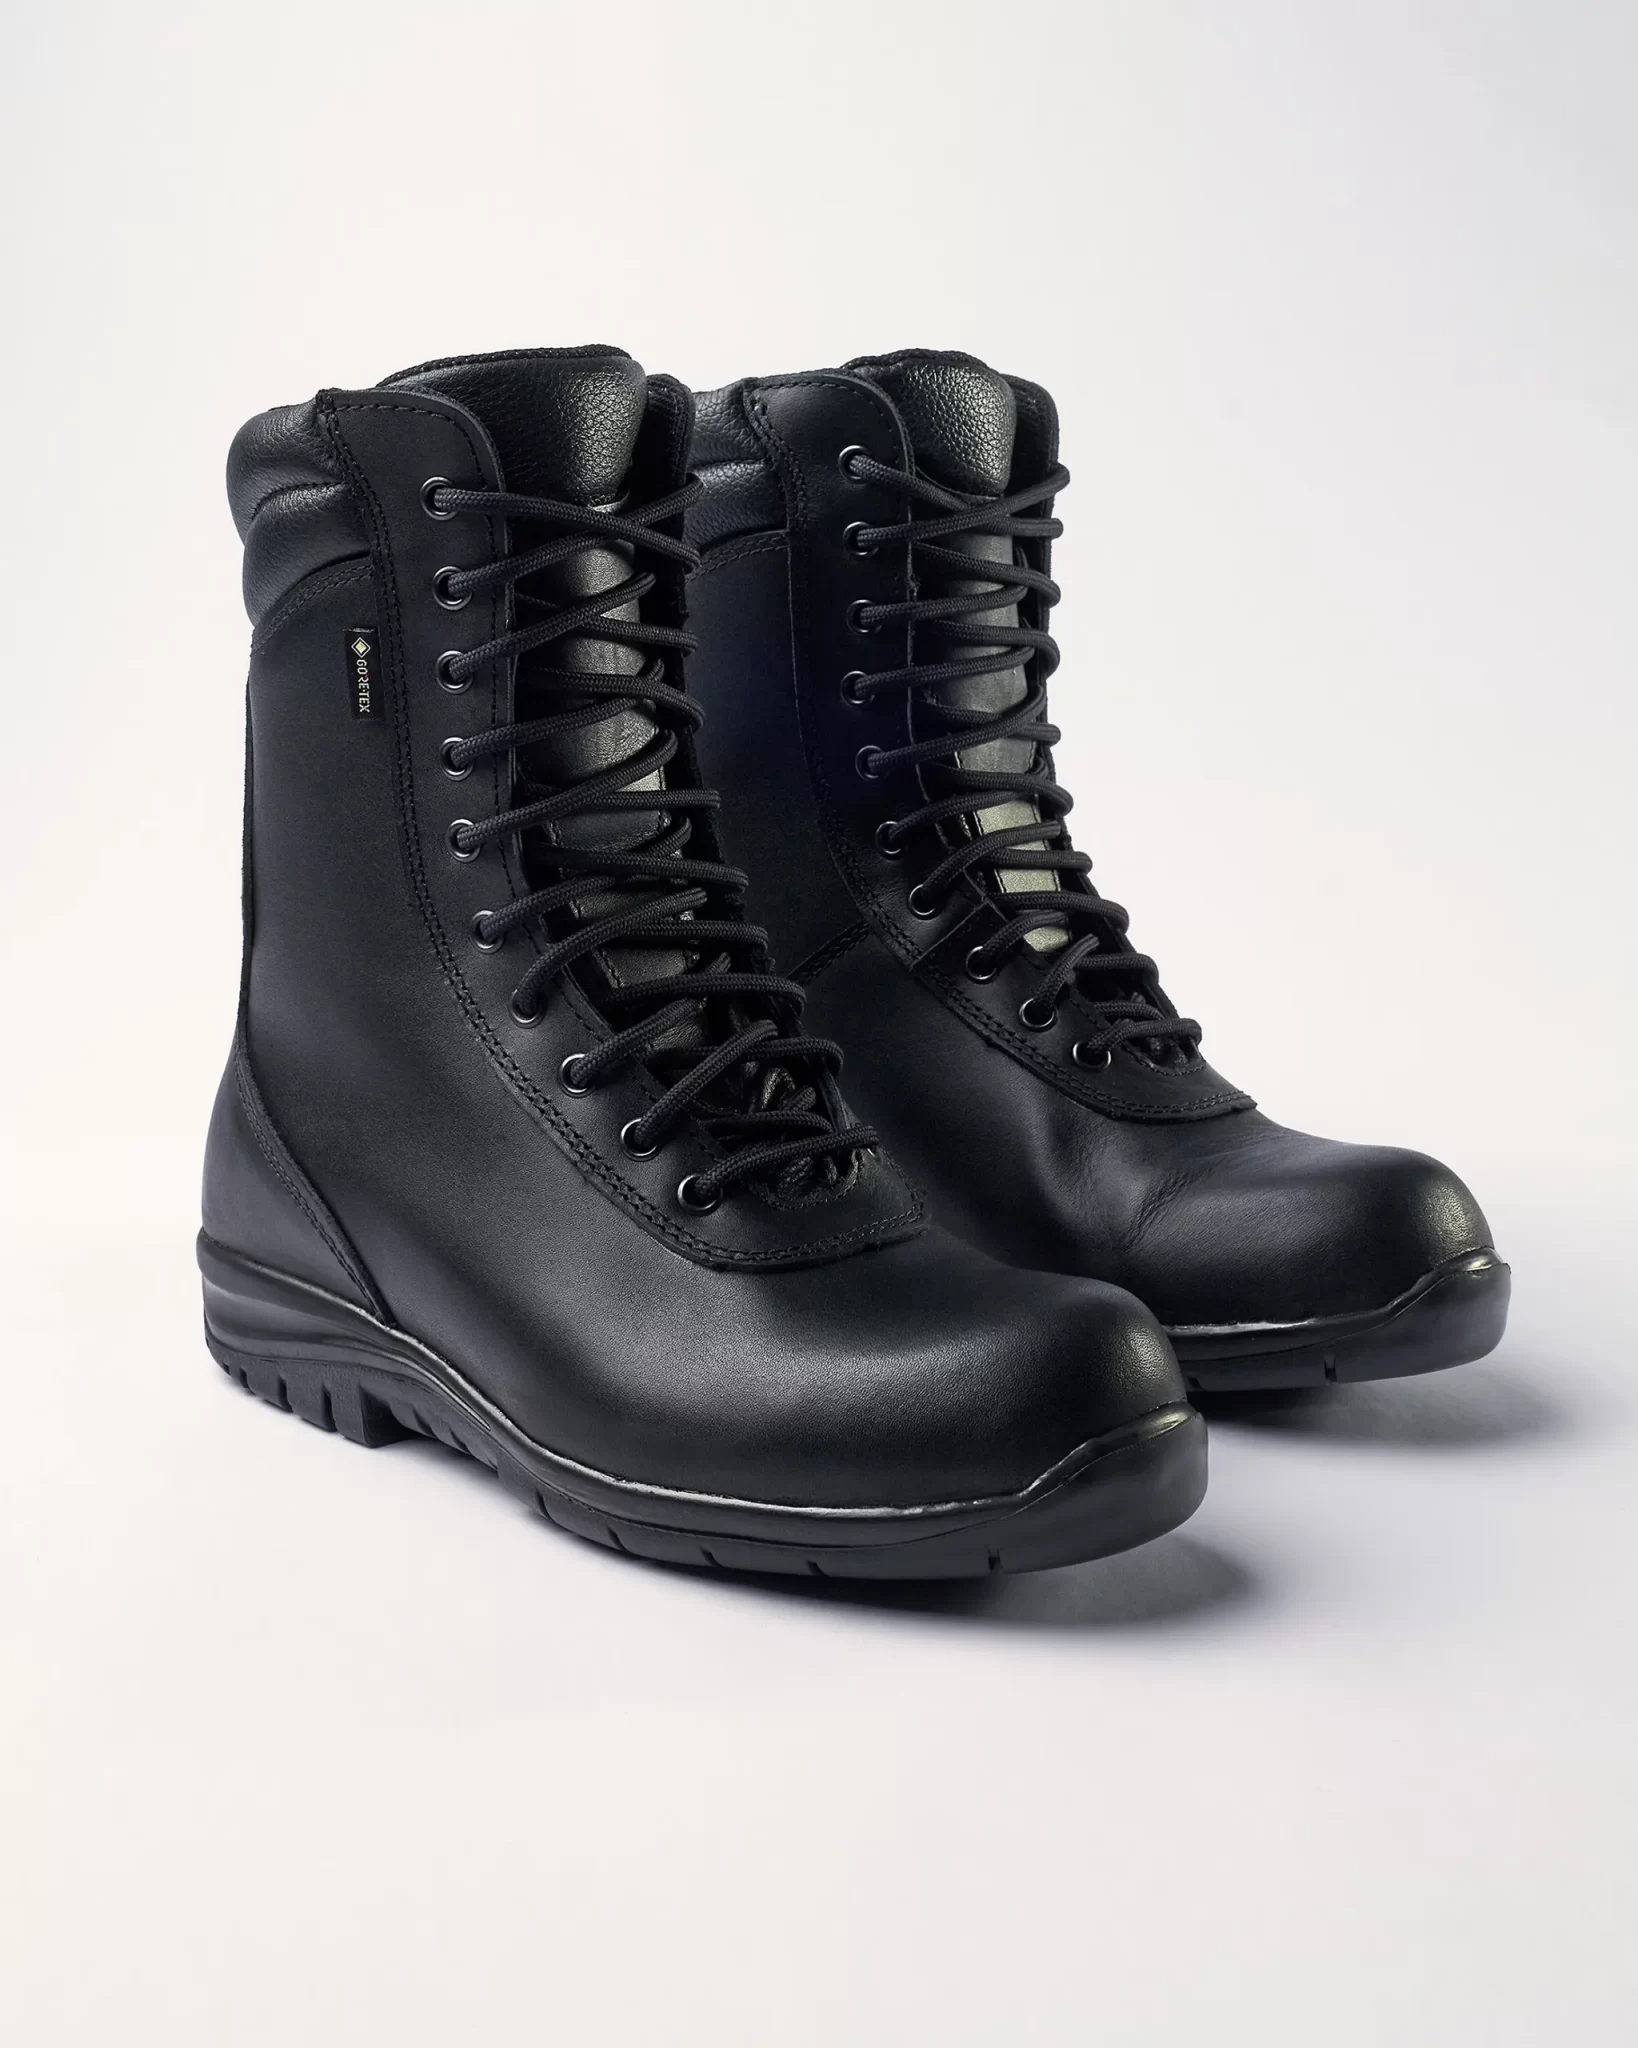 Waterproof Box-Calf leather police boots